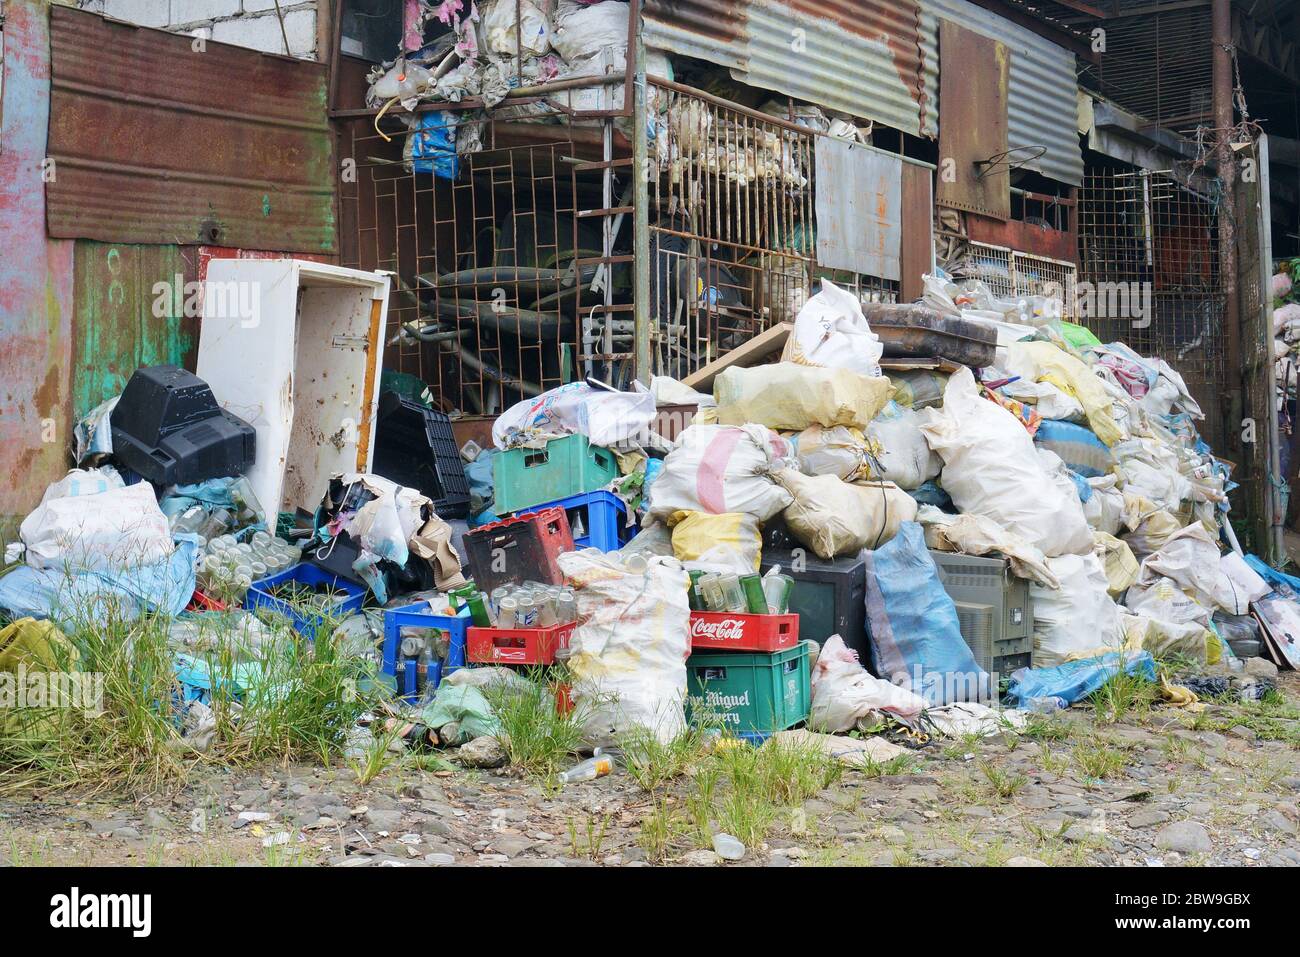 Pile of garbage to sort, recycle and reuse. One of the ways to reduce waste. Photo taken in Benguet, Philippines on October 7, 2019. Stock Photo